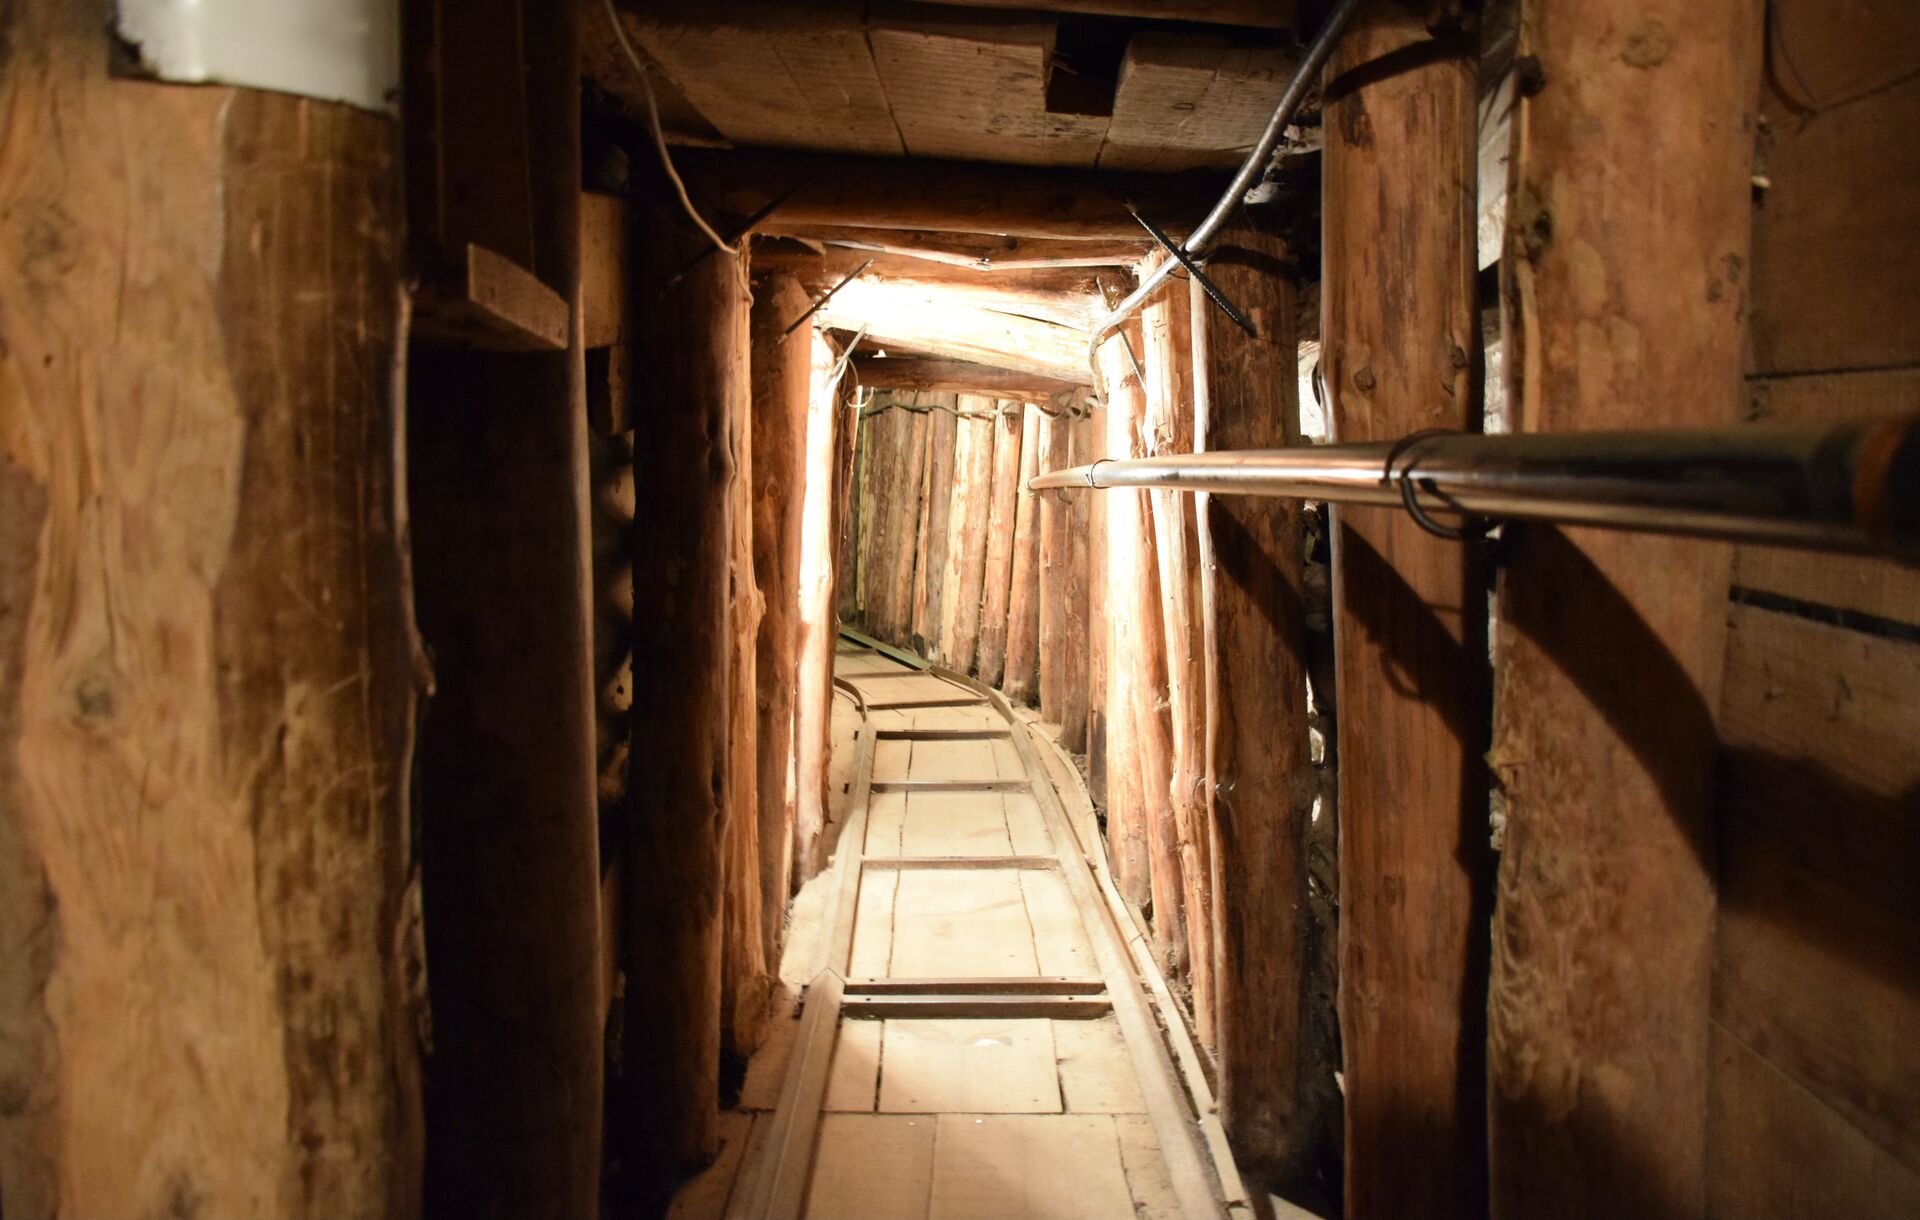 The Tunnel of Hope from the inside, showing a think tunnel and track with wooden planks on the walls and sunlight streaming through